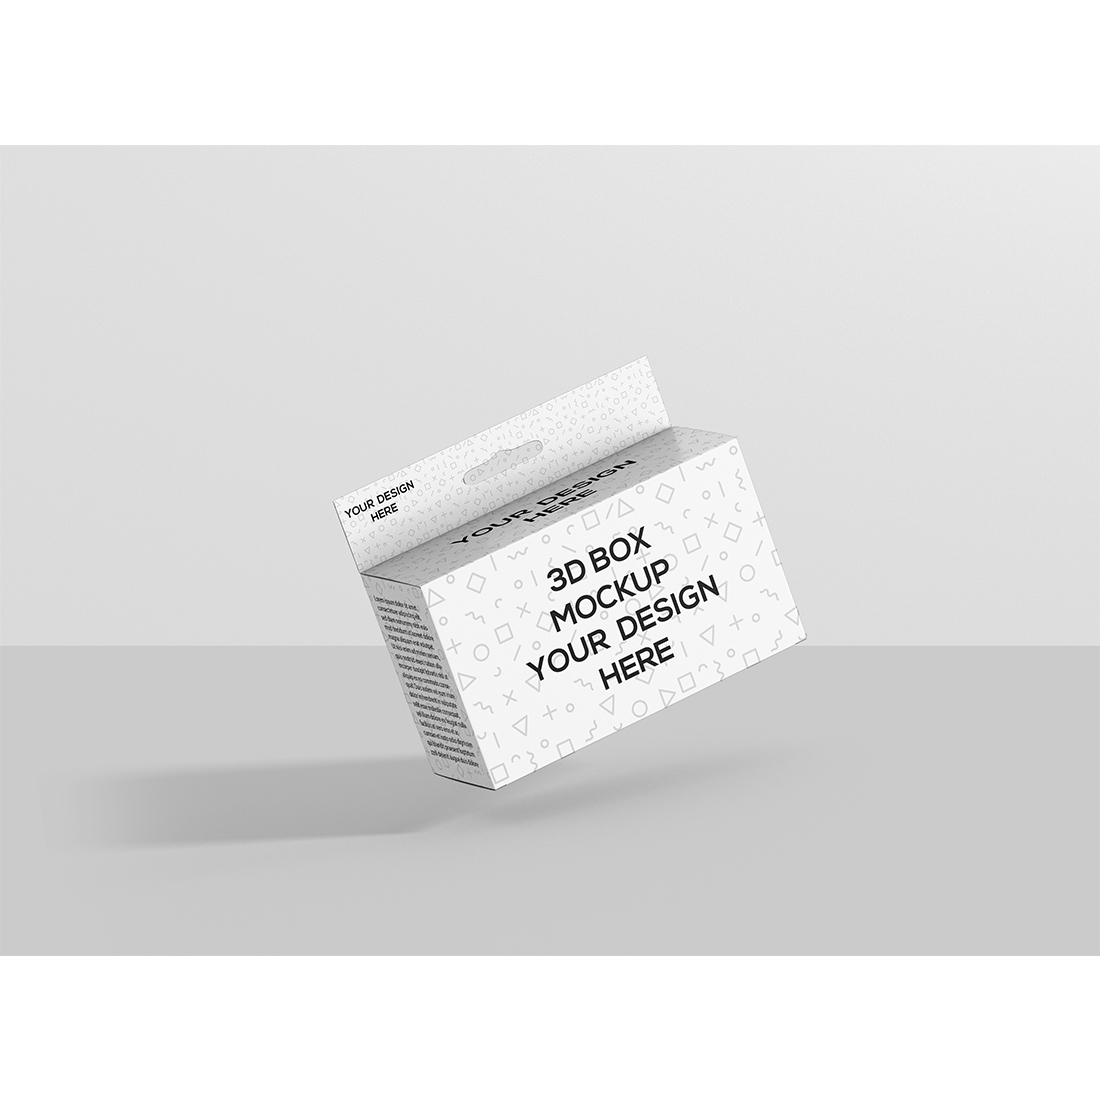 Slim Rectangle with Hanger Box Mockup cover image.